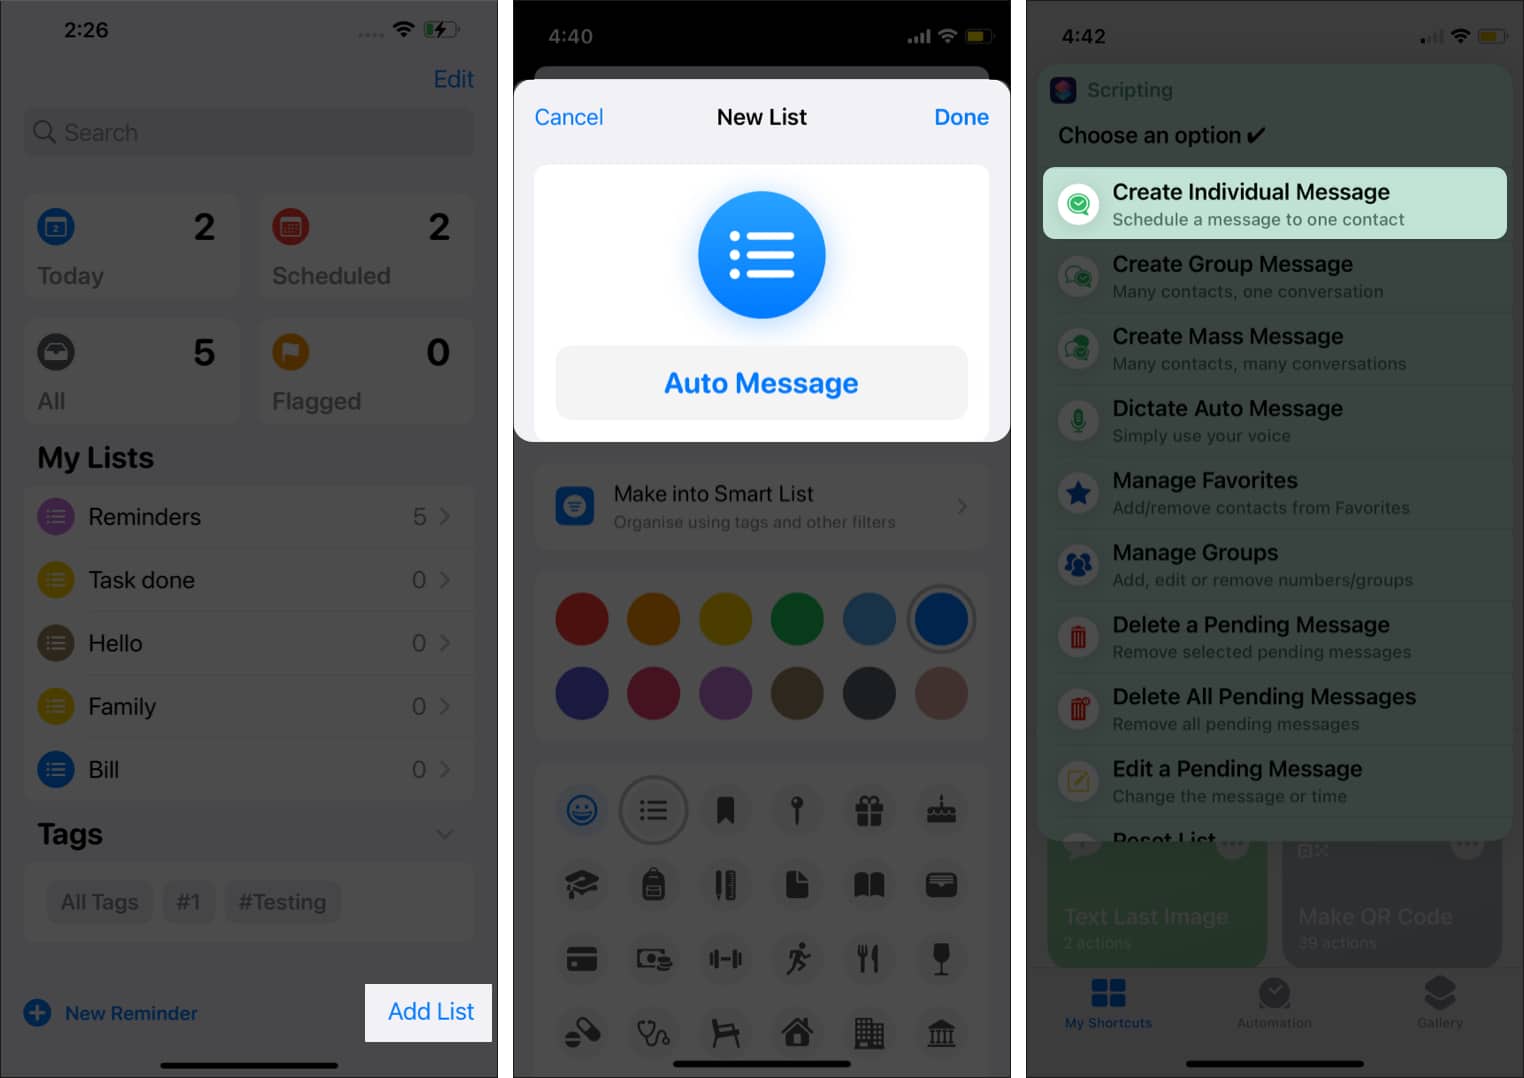 Create Individual Message from the pop-up on iPhone